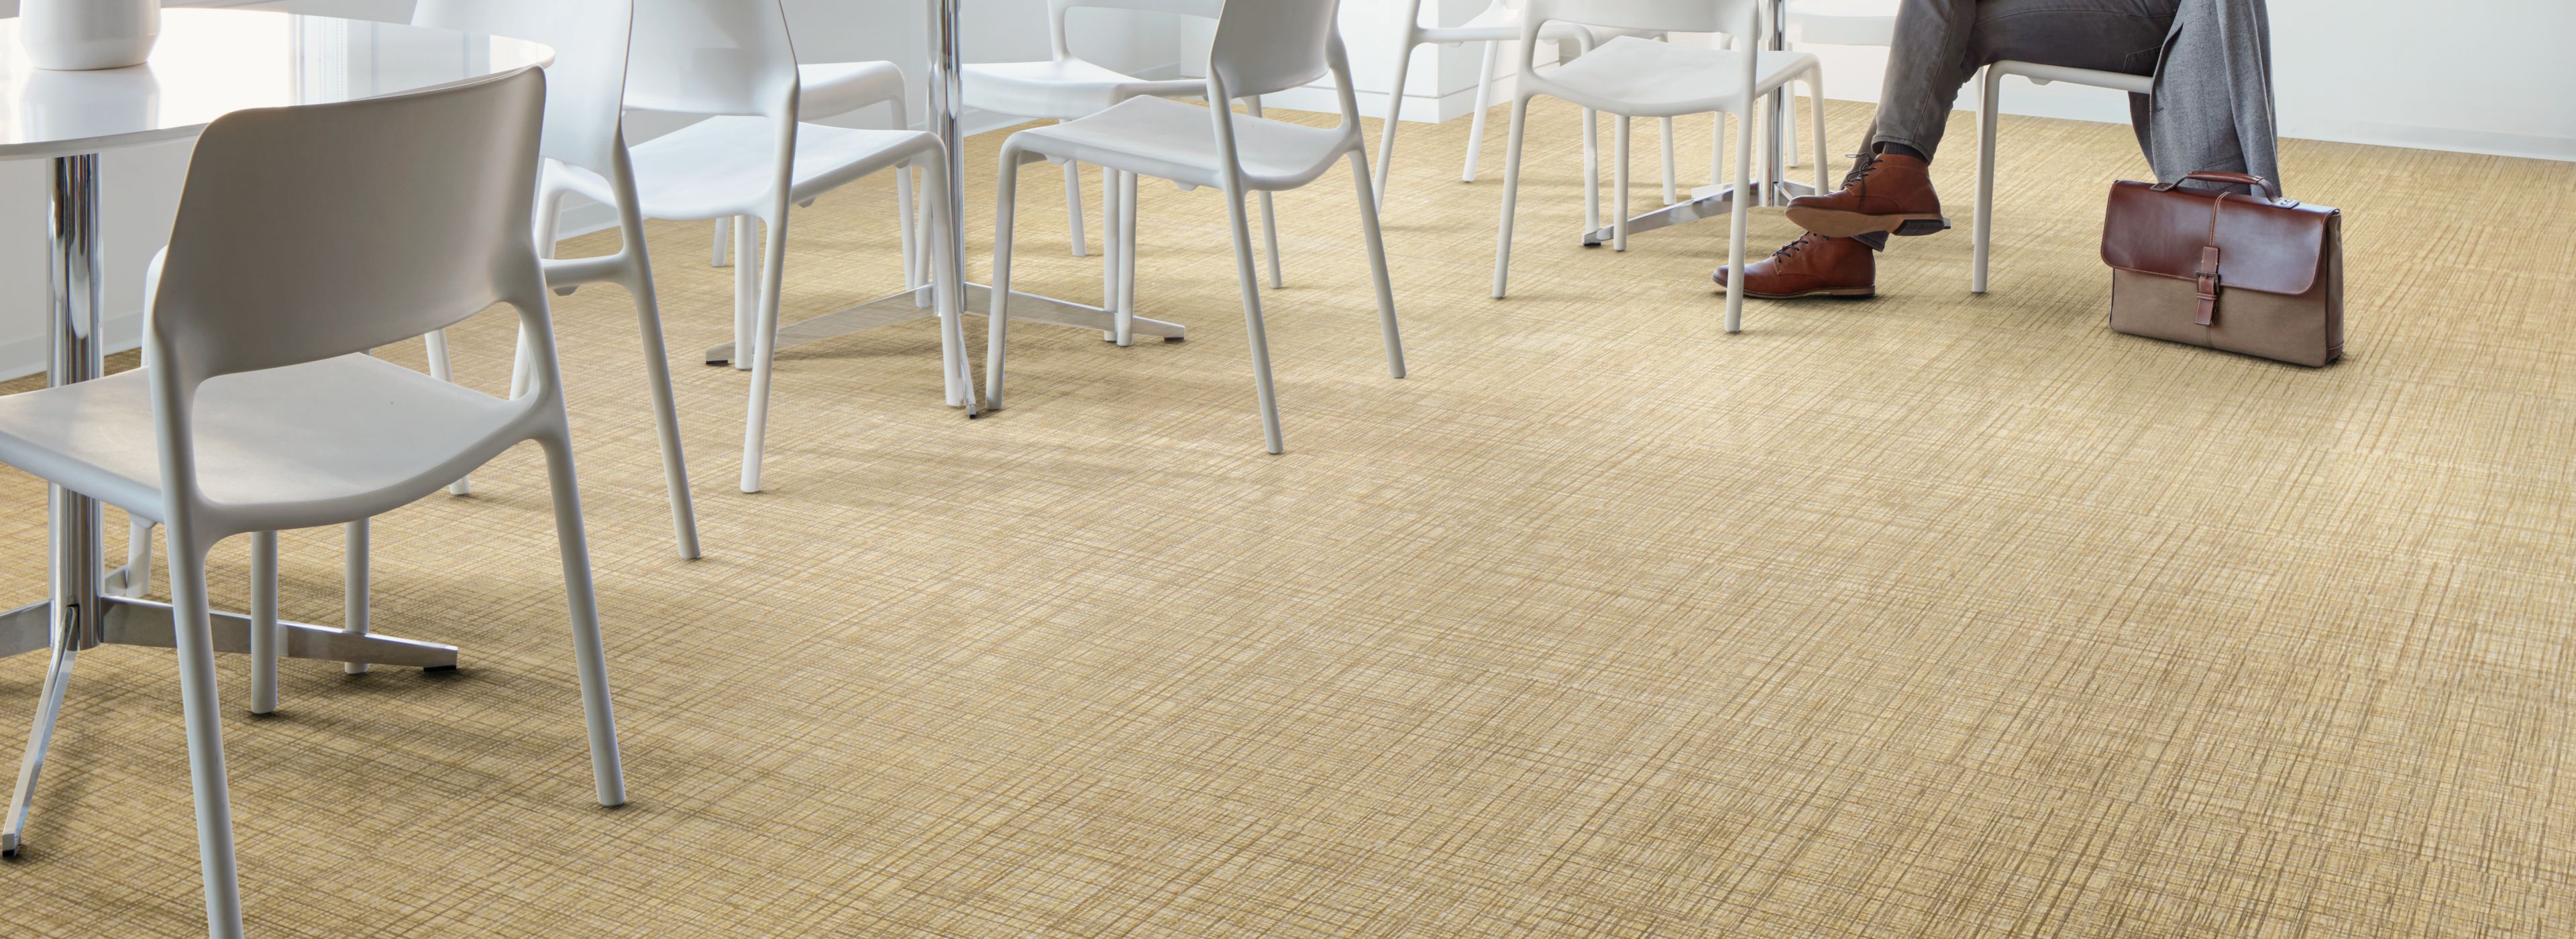 image Interface Native Fabric LVT in office common area with tables and chairs numéro 1